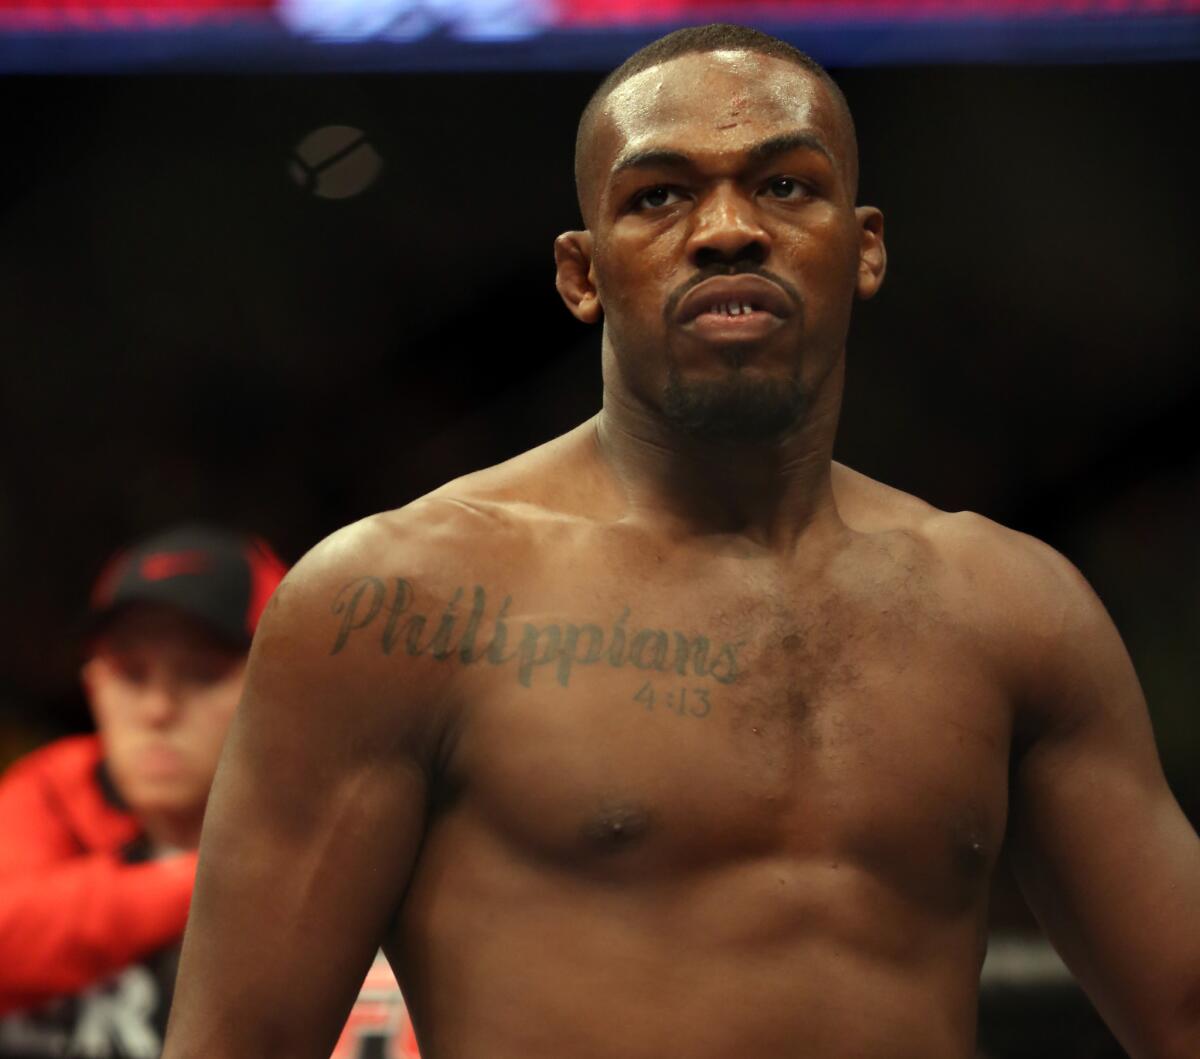 Jon Jones is seen in the ring before his UFC bout in April 2013. Jones is hoping to quiet his critics with a strong performance Saturday against Glover Teixeira.